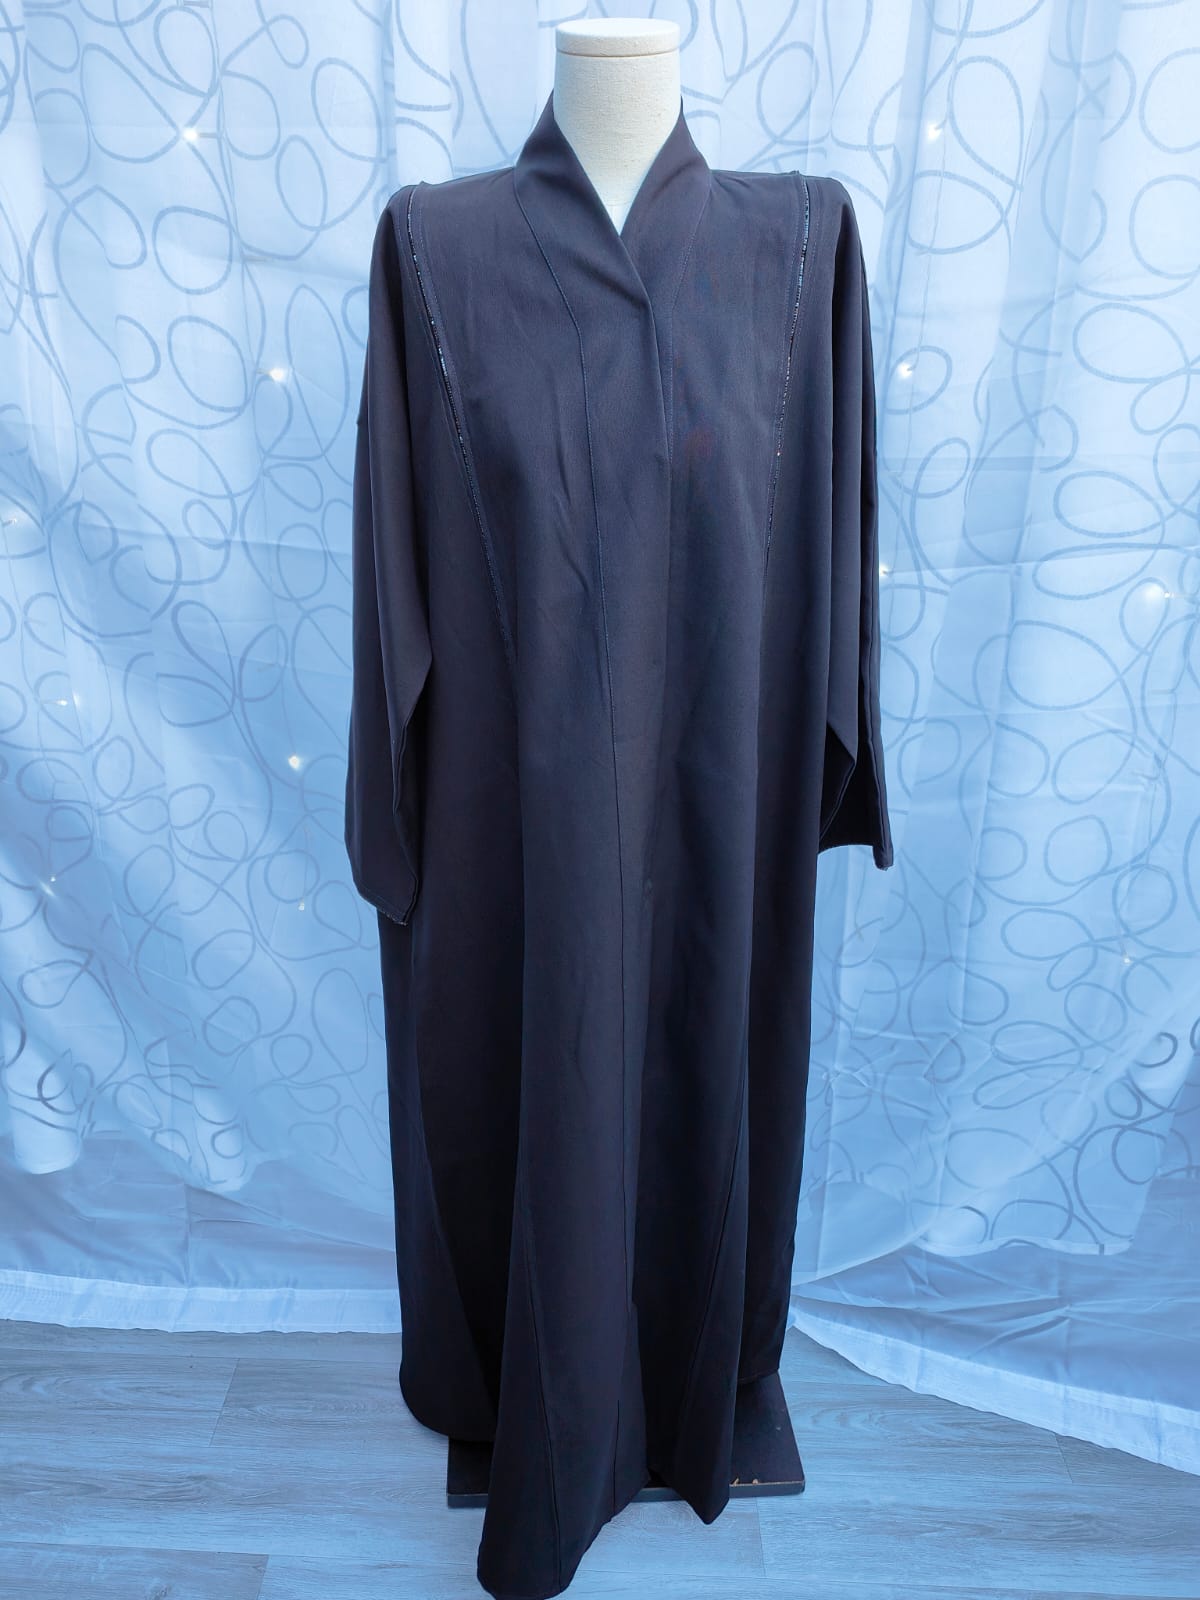 Discover the allure of our Exquisite Black Burqa Abaya - a blend of modern style and traditional modesty, exclusively available at Hikmah Boutique. Perfect for various occasions, this abaya exudes sophistication.